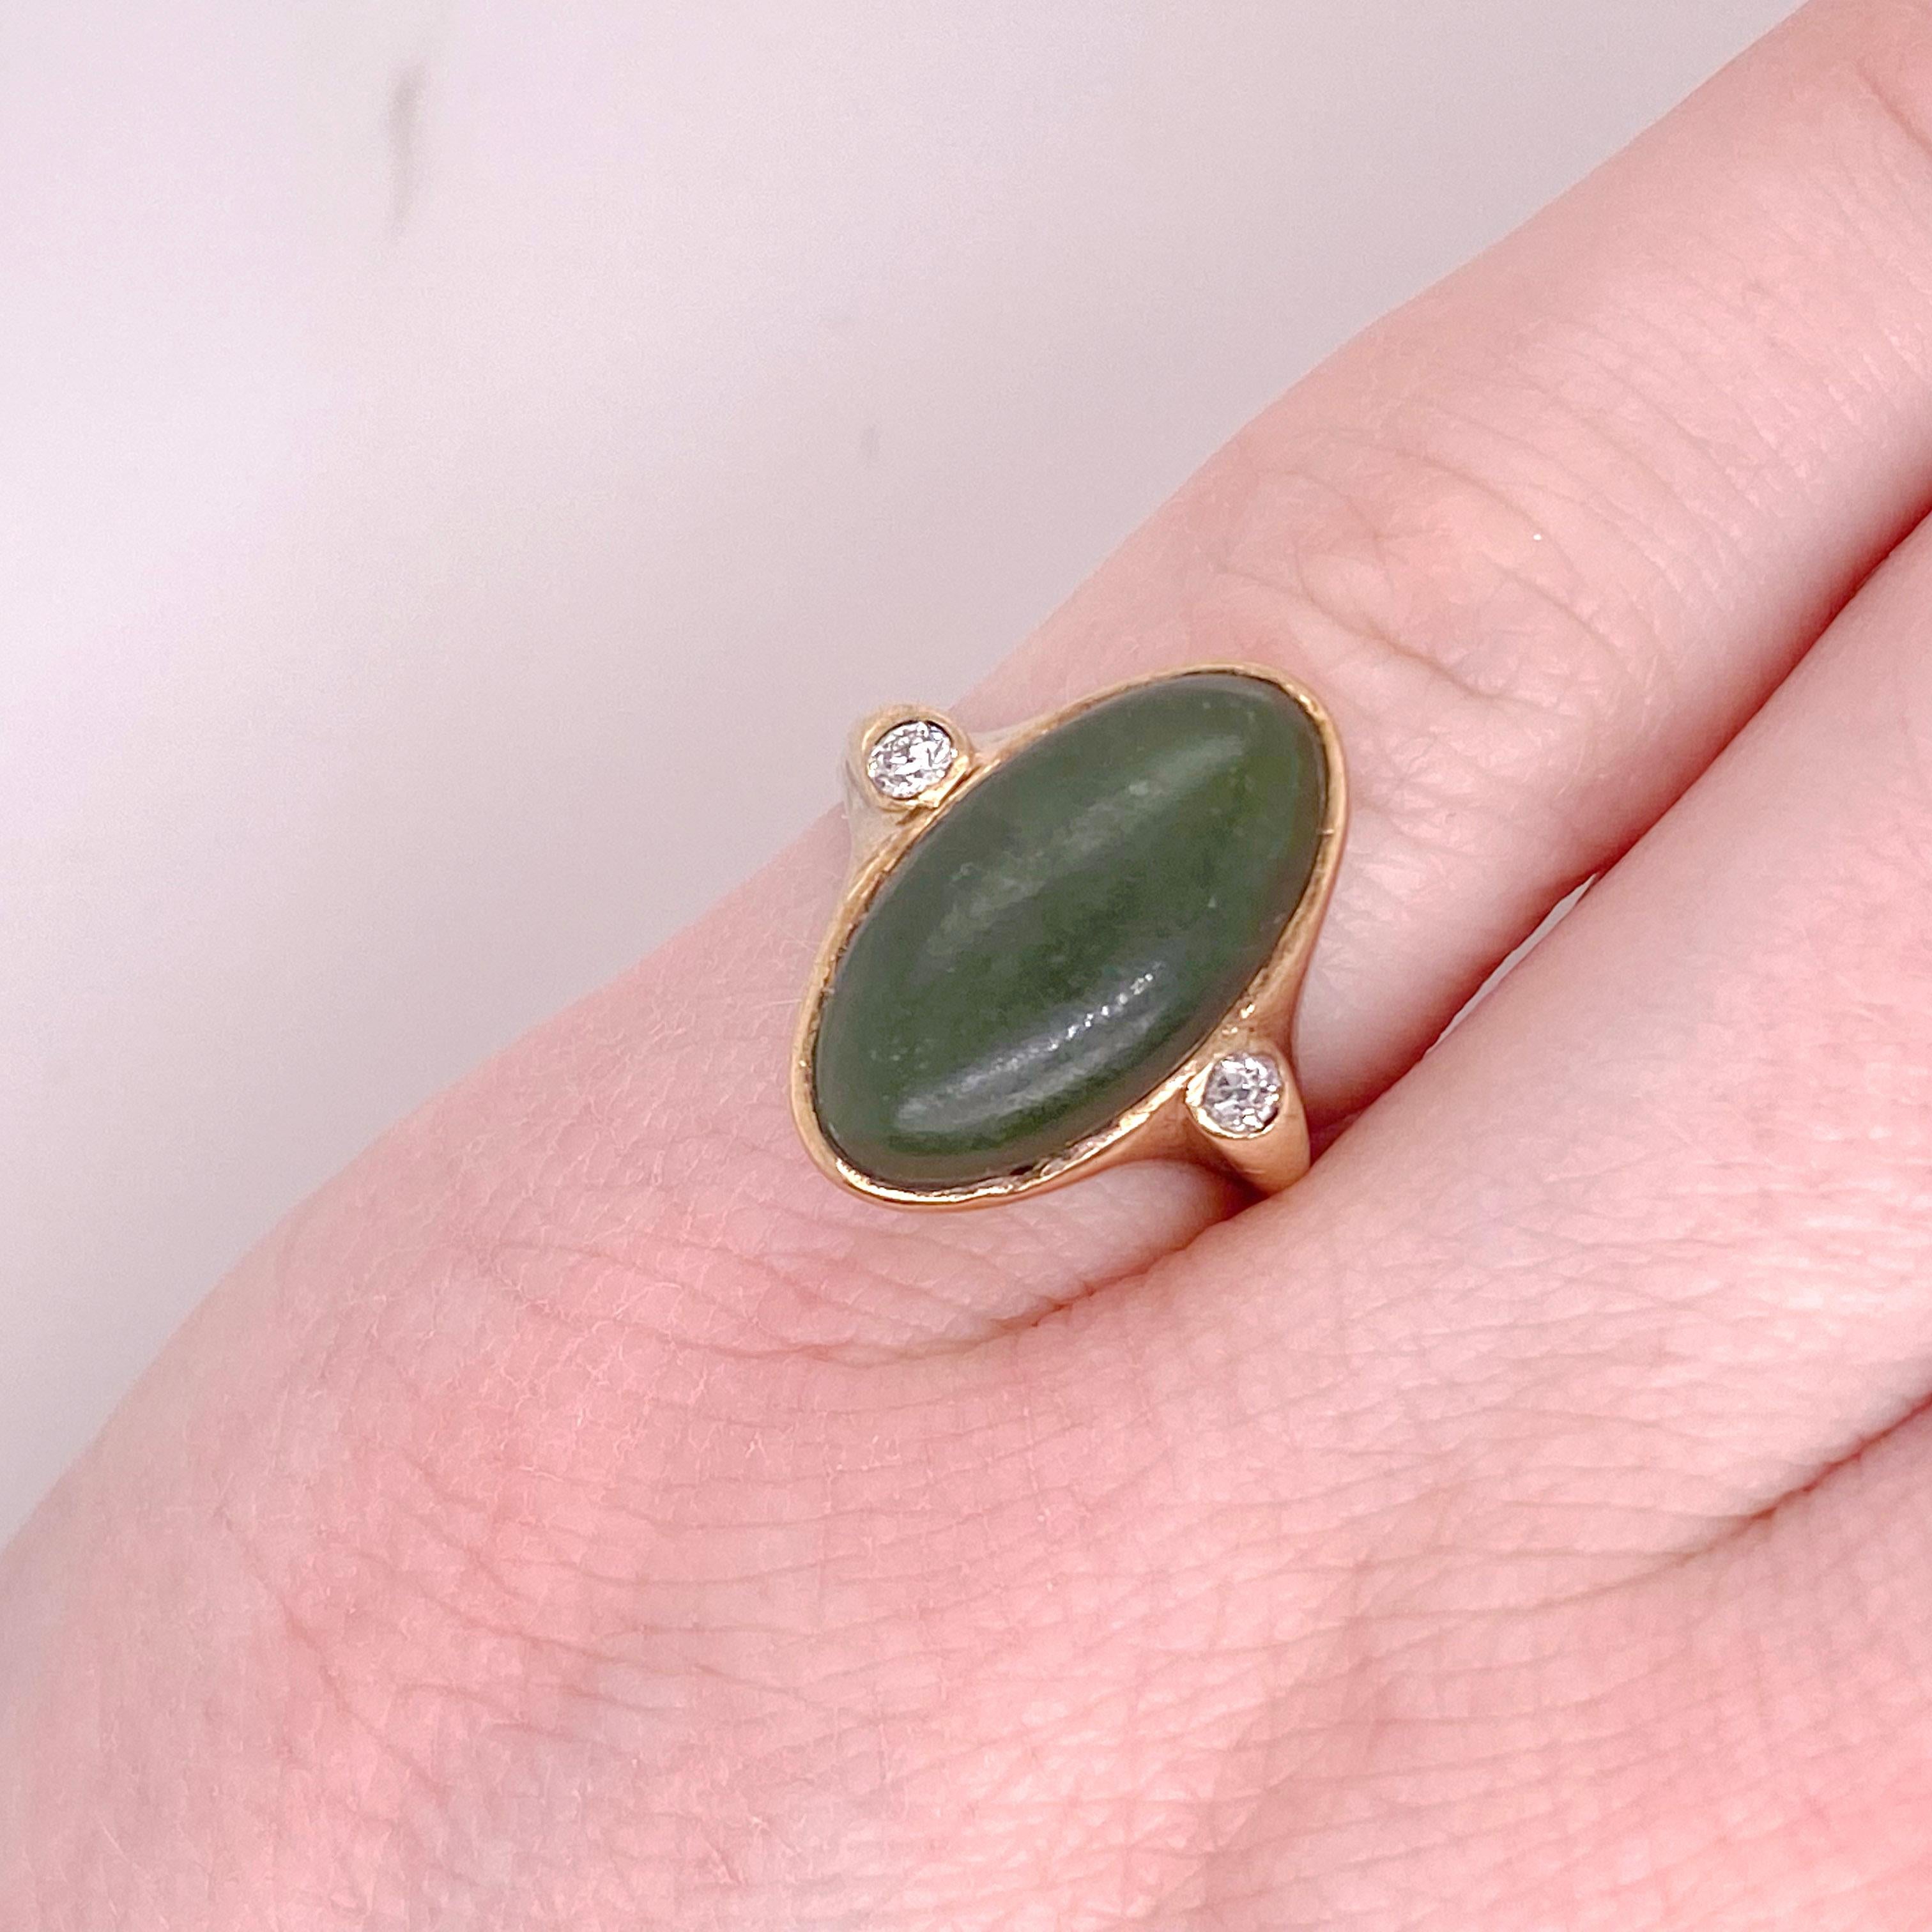 This genuine jadeite jade ring has an oval cut gemstone with a diamond on either side. The details of the beautiful ring are listed below:
14K Yellow Gold
Diamond Number: 2
Diamond Shape: Round
Diamond Total Weight: .12 Carat 
Diamond Quality: SI1